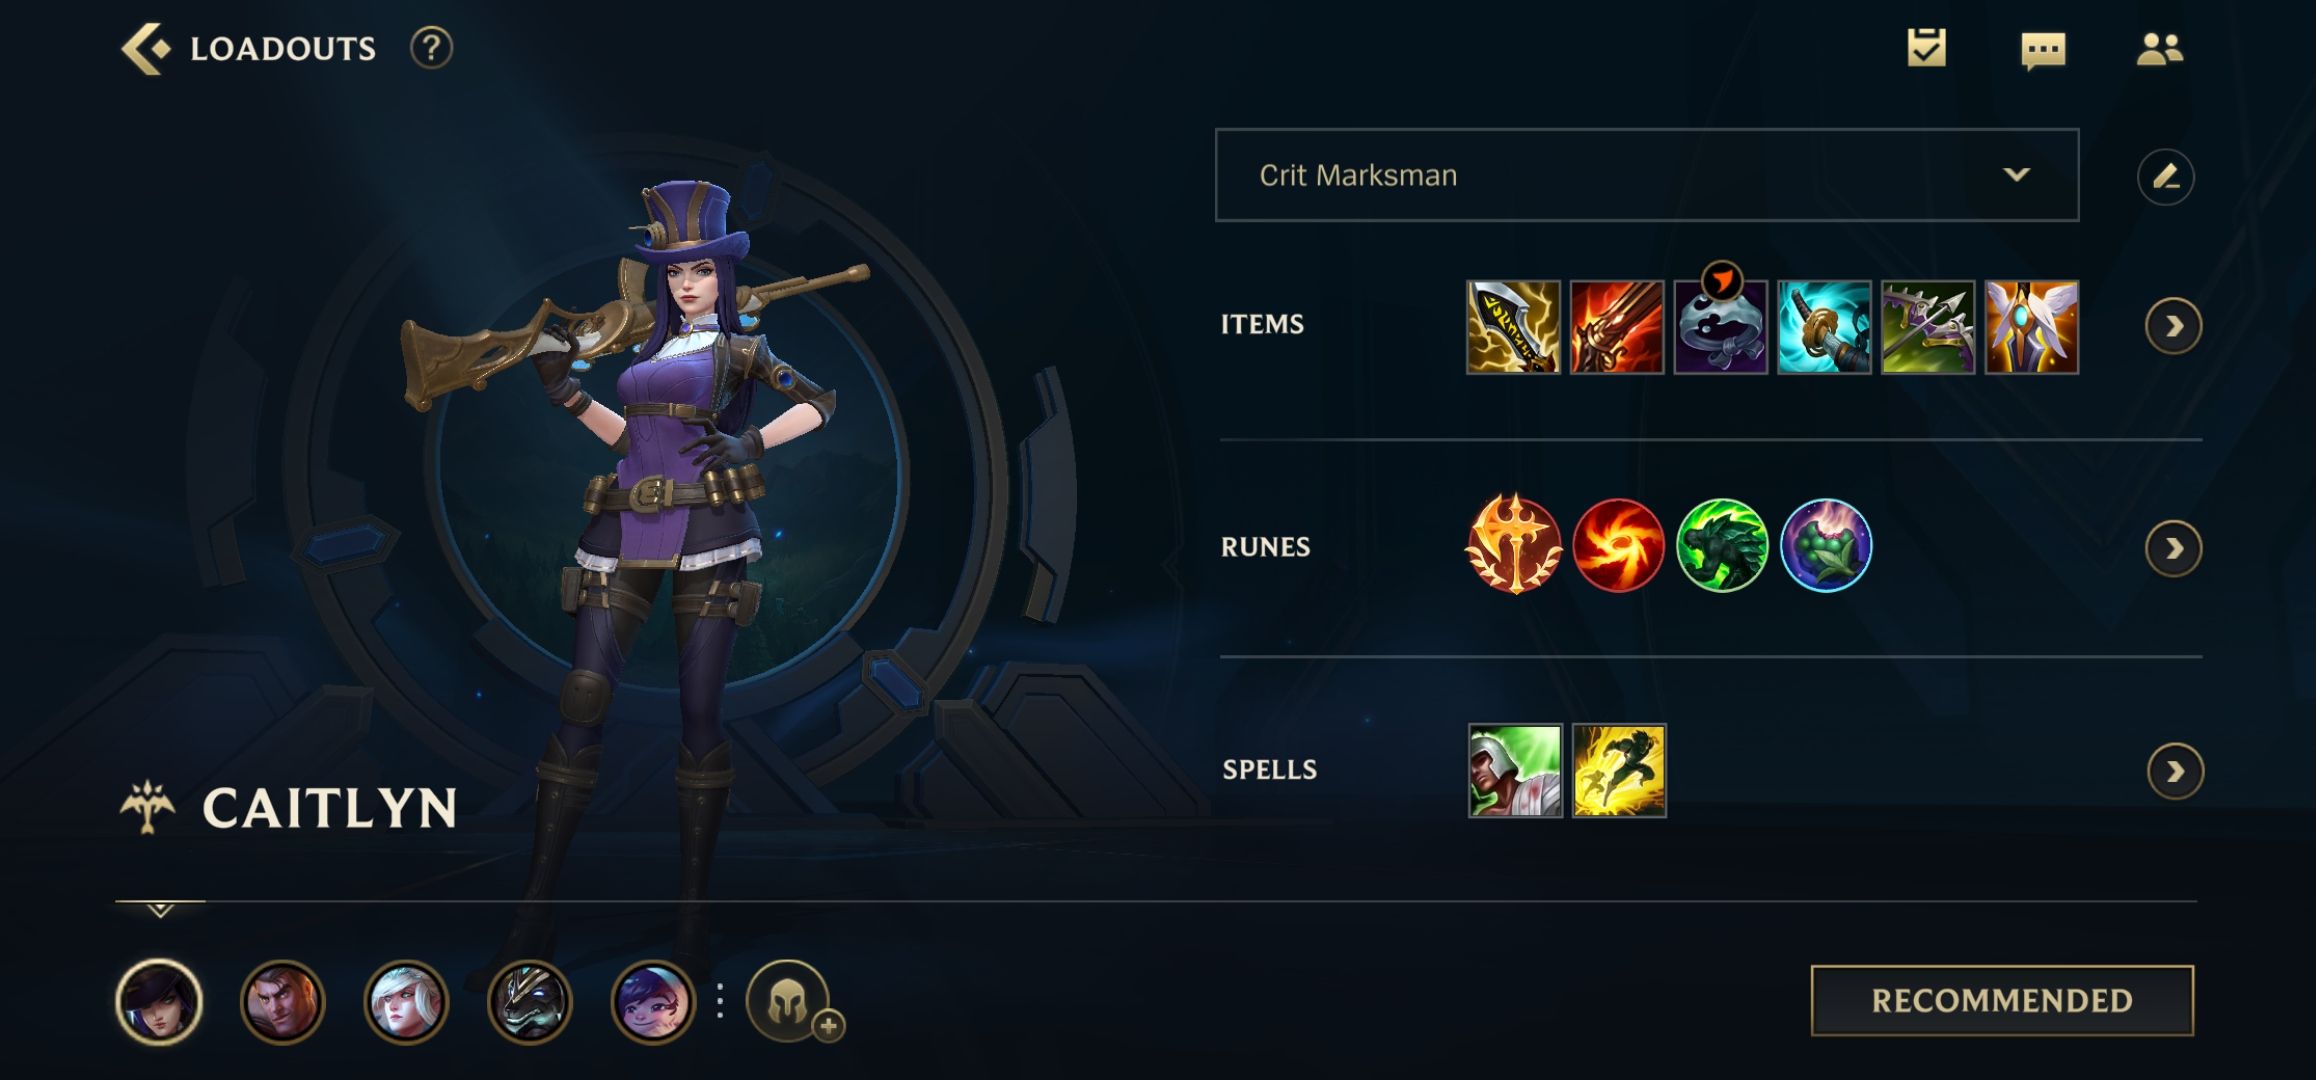 Caitlyn loadout screen beginner recommended pre-set builds items runes spells